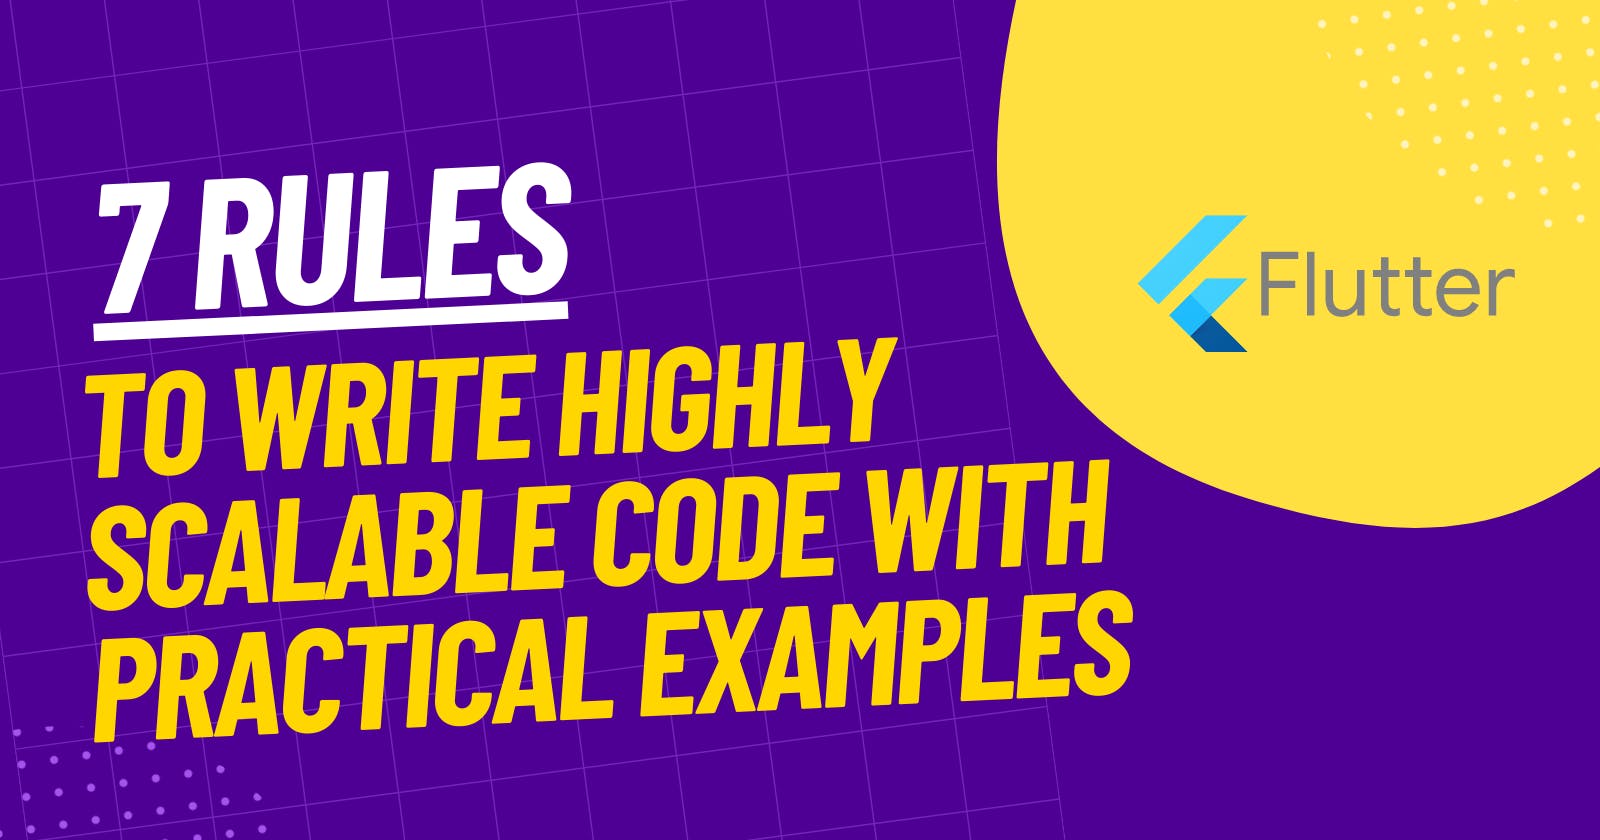 7 Rules to Write Highly Scalable Code with Practical Examples 🚀